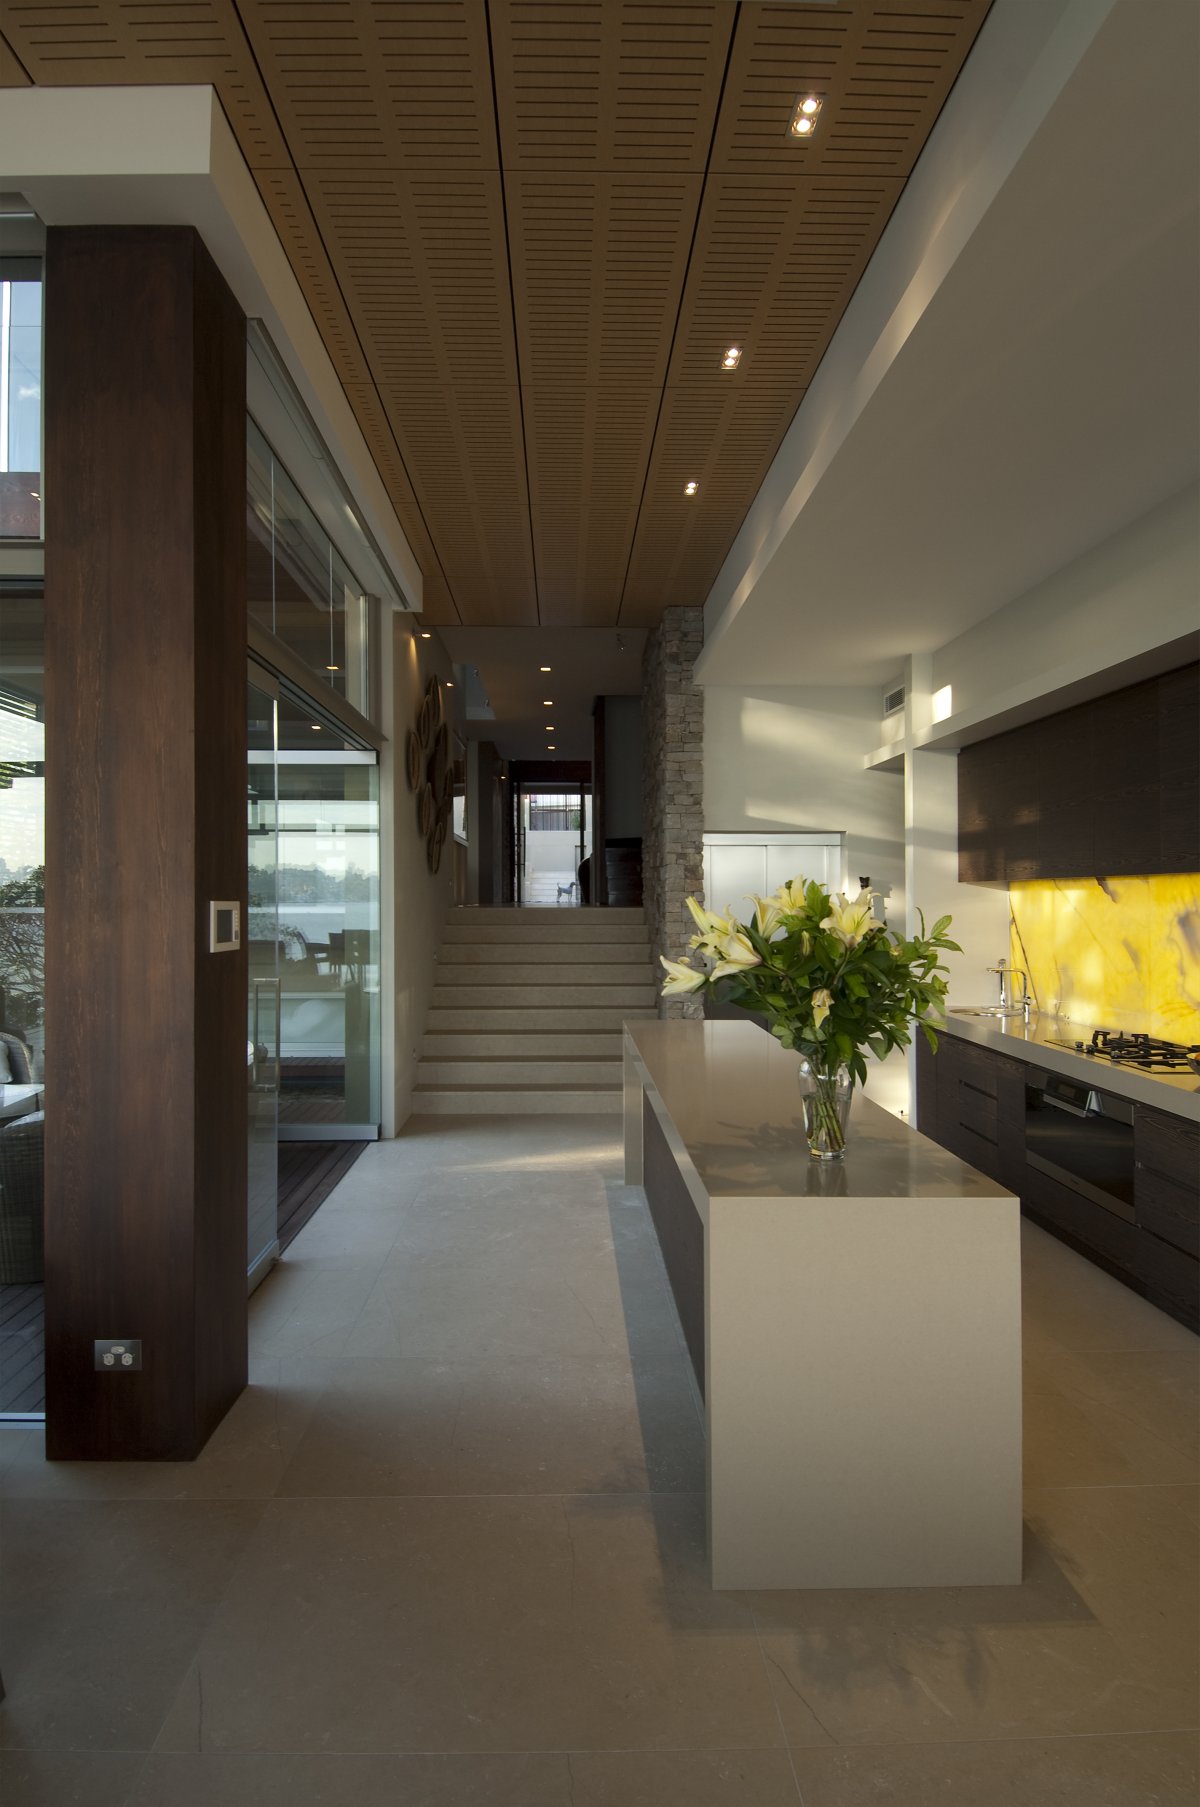 Kitchen Island, Stairs, Glass Door, Waterfront Home in Vaucluse, Sydney